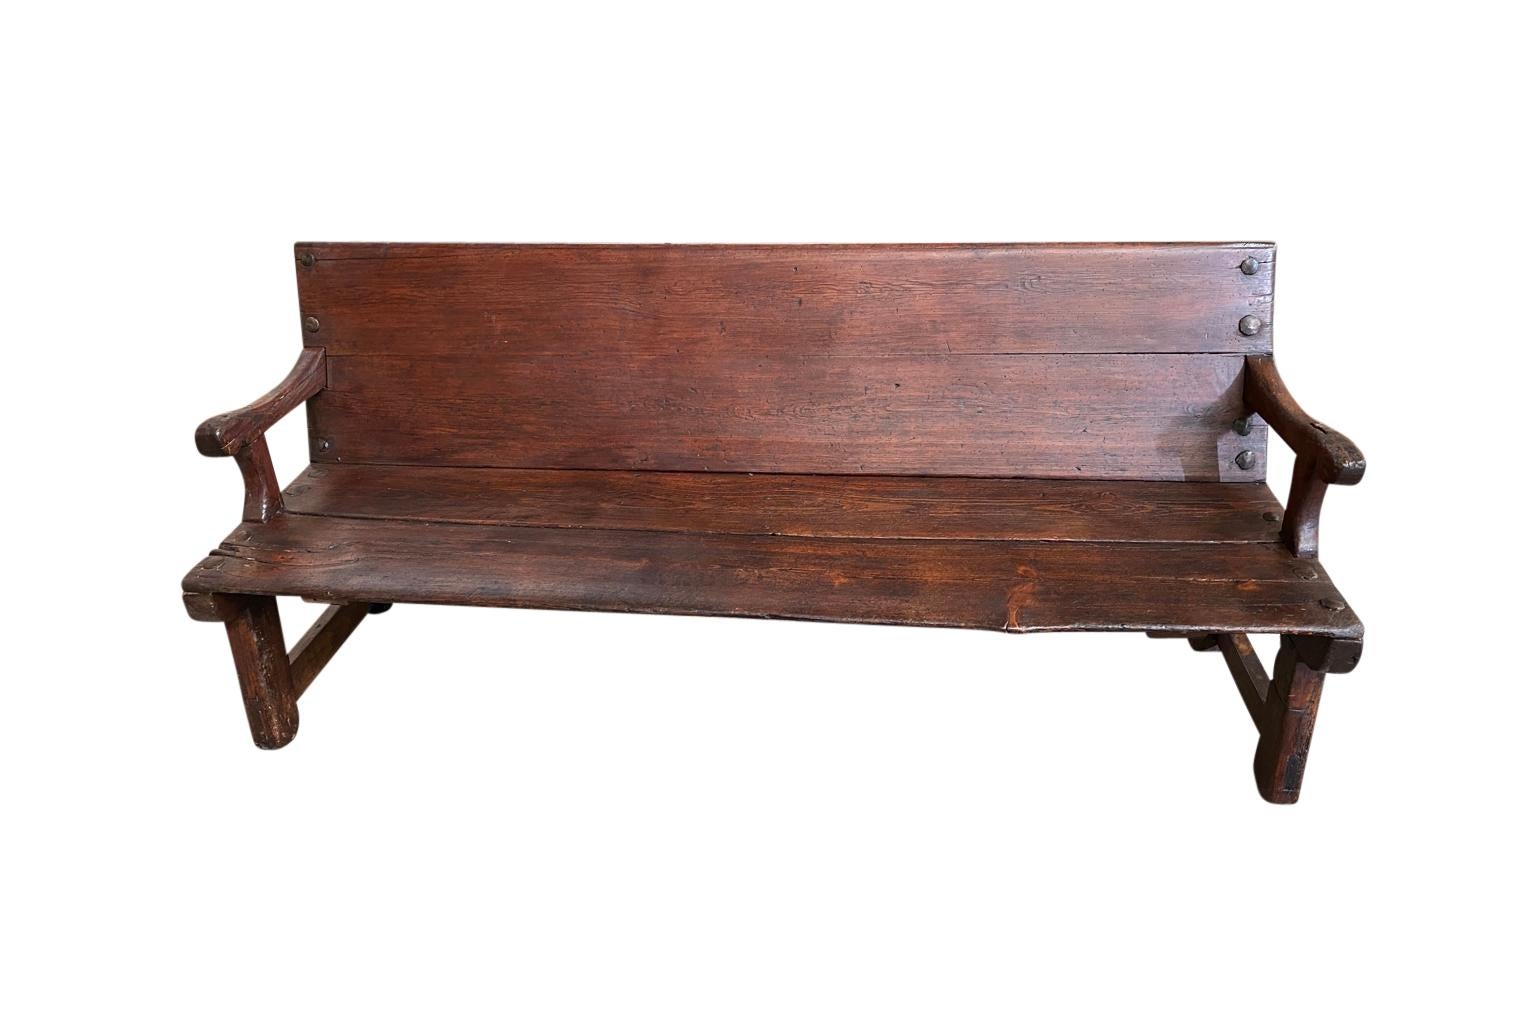 A lovely 18th century bench from the South of France. Soundly constructed from richly stained pine. Beautiful patina.